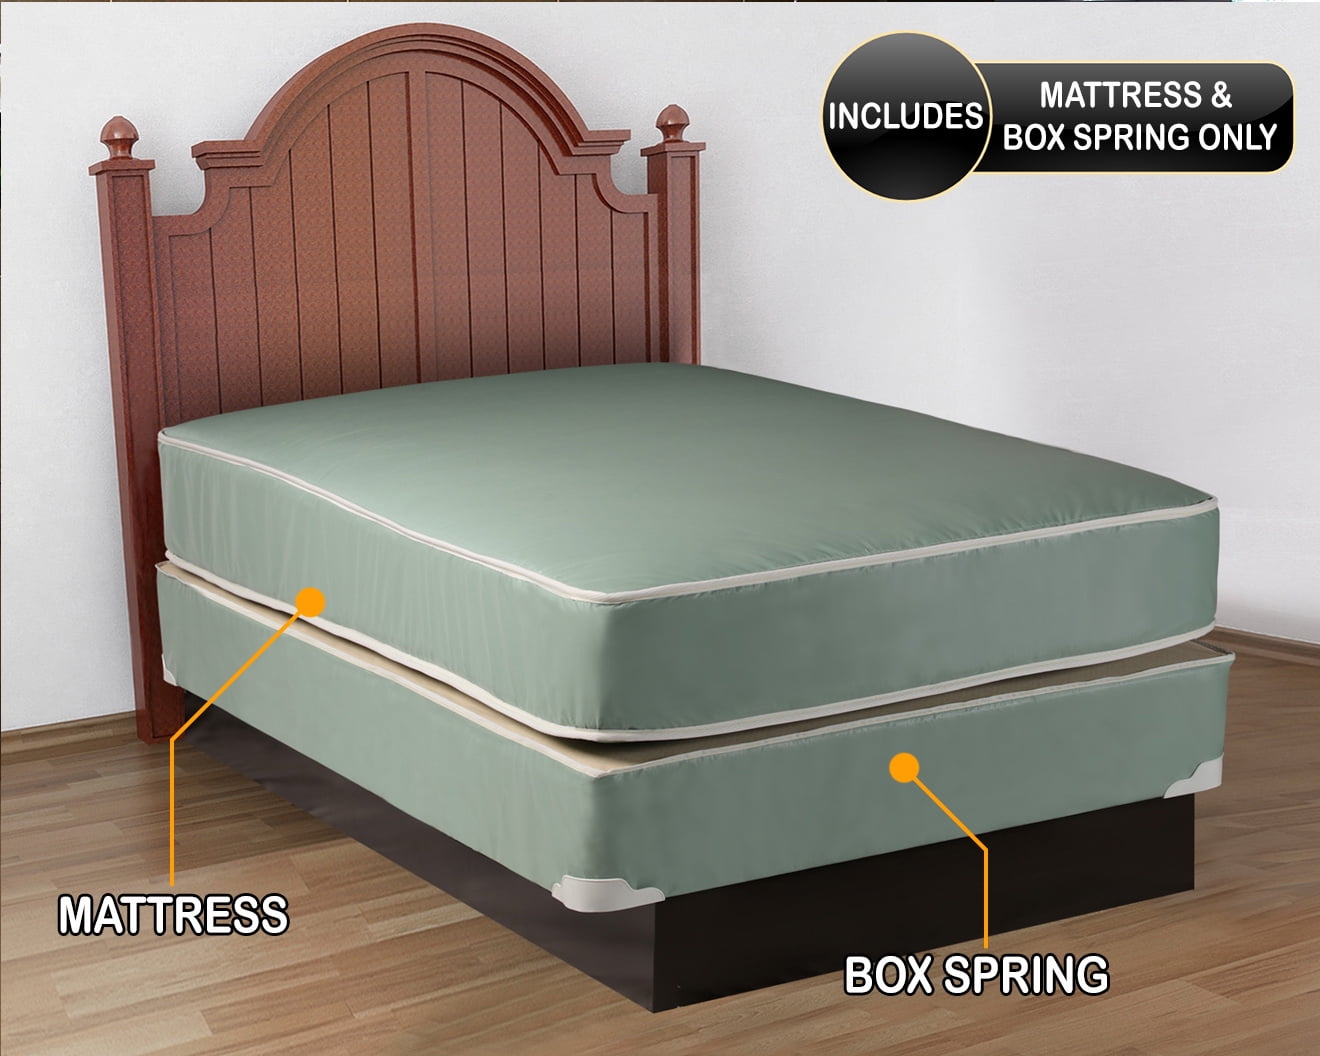 inexpensive full-size box springs and mattress